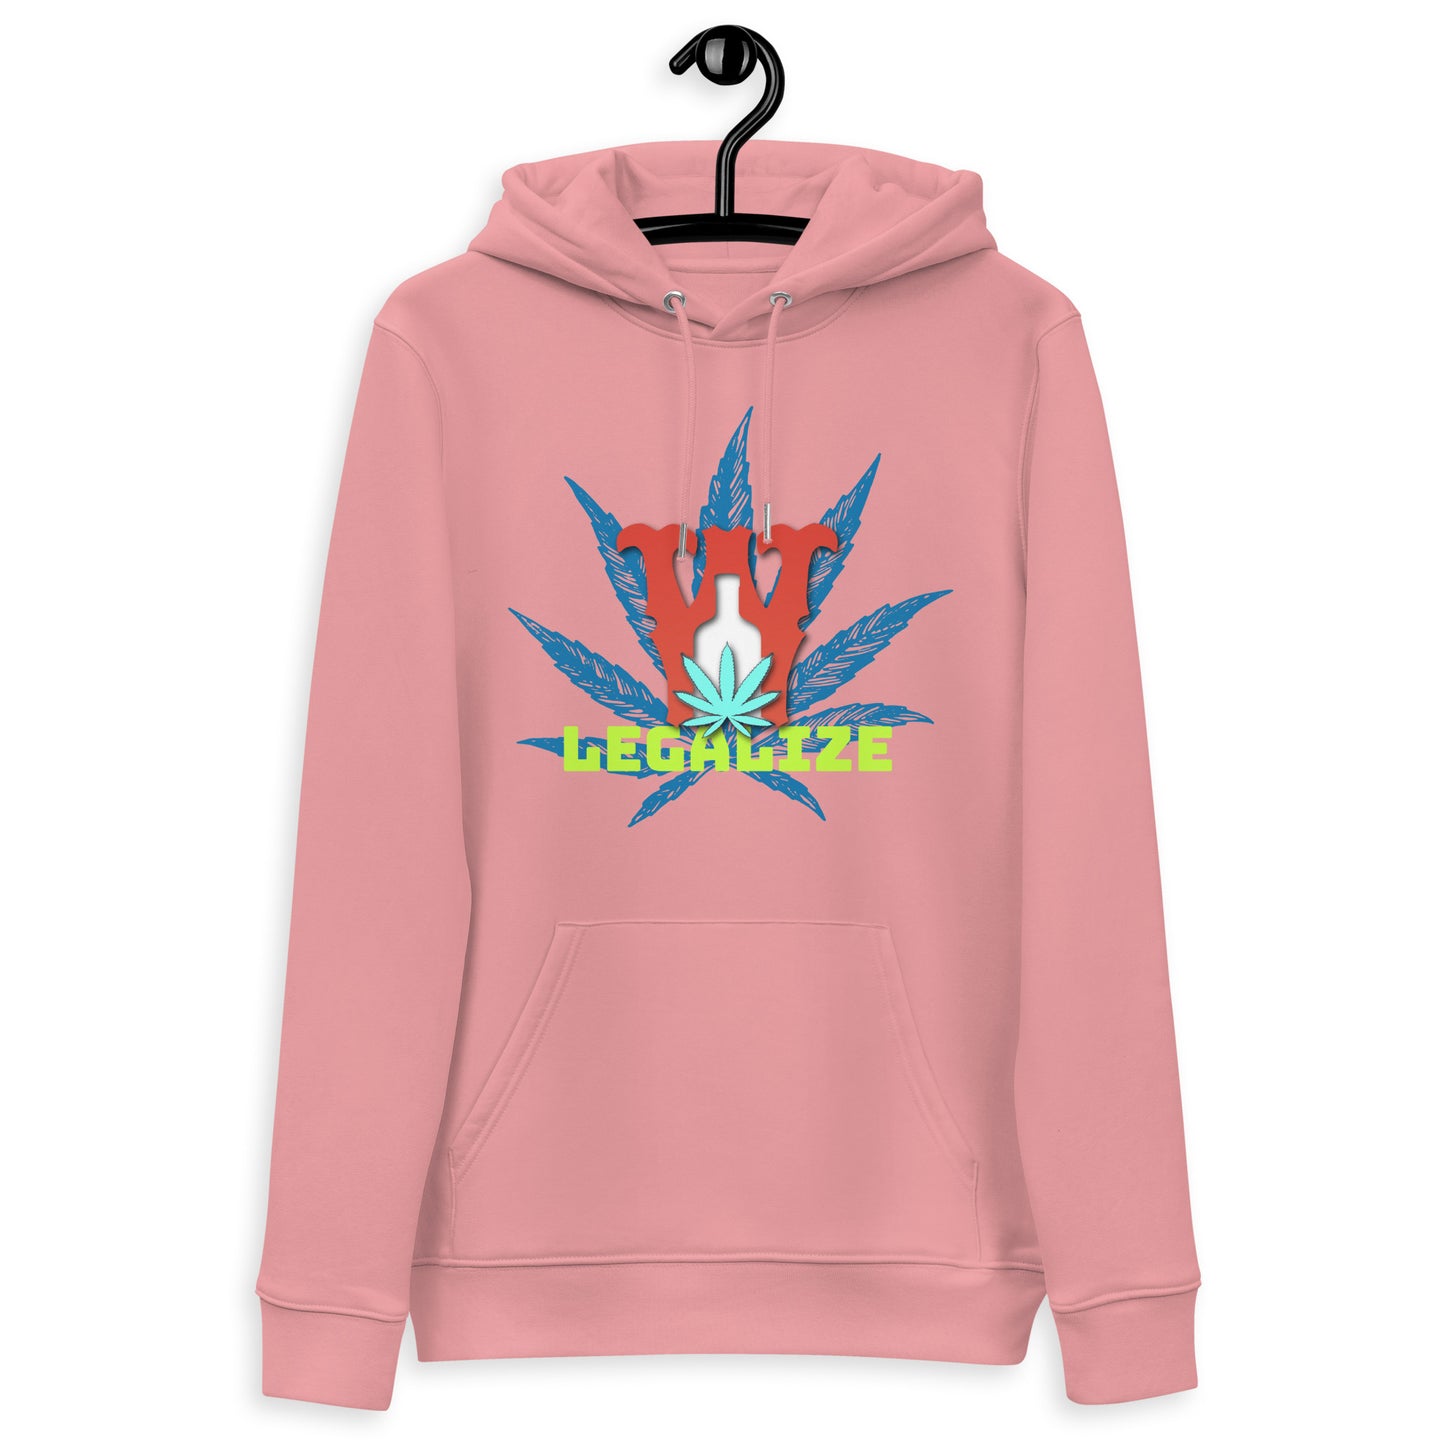 "Legalize" hoodie